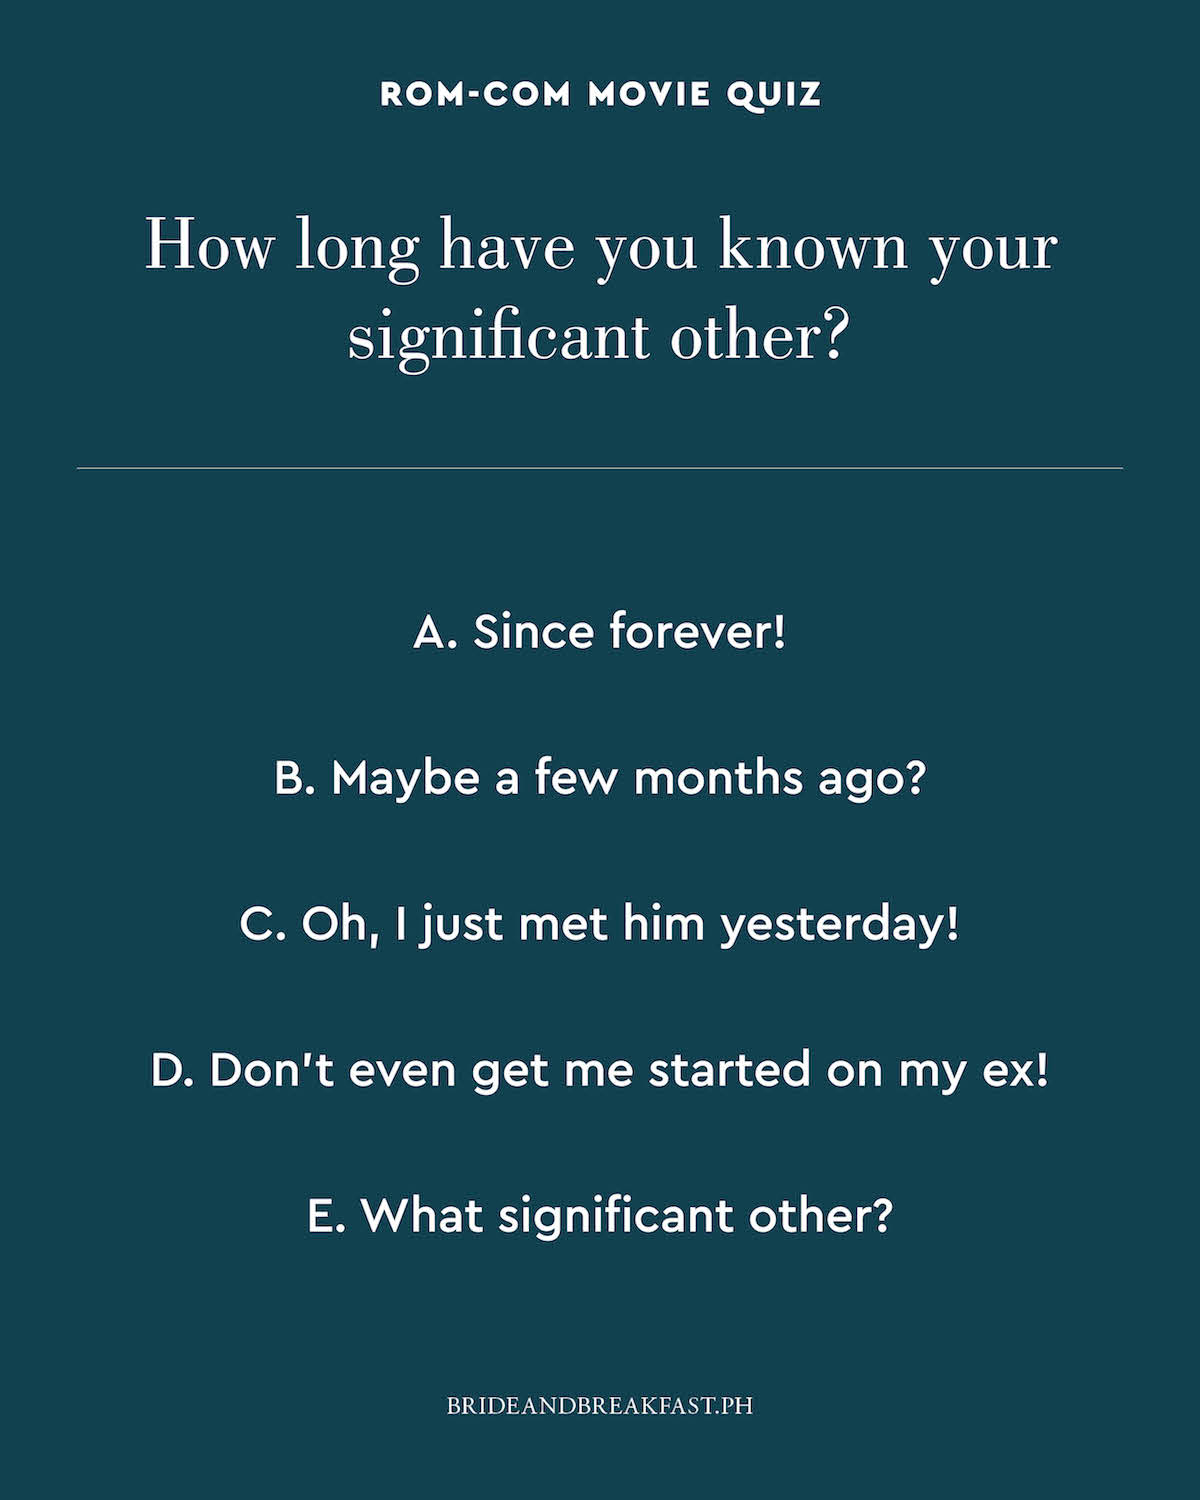 How long have you known your significant other? A. Since forever! B. Maybe a few months ago? C. Oh, I just met him yesterday! D. Don't even get me started on my ex! E. What significant other?